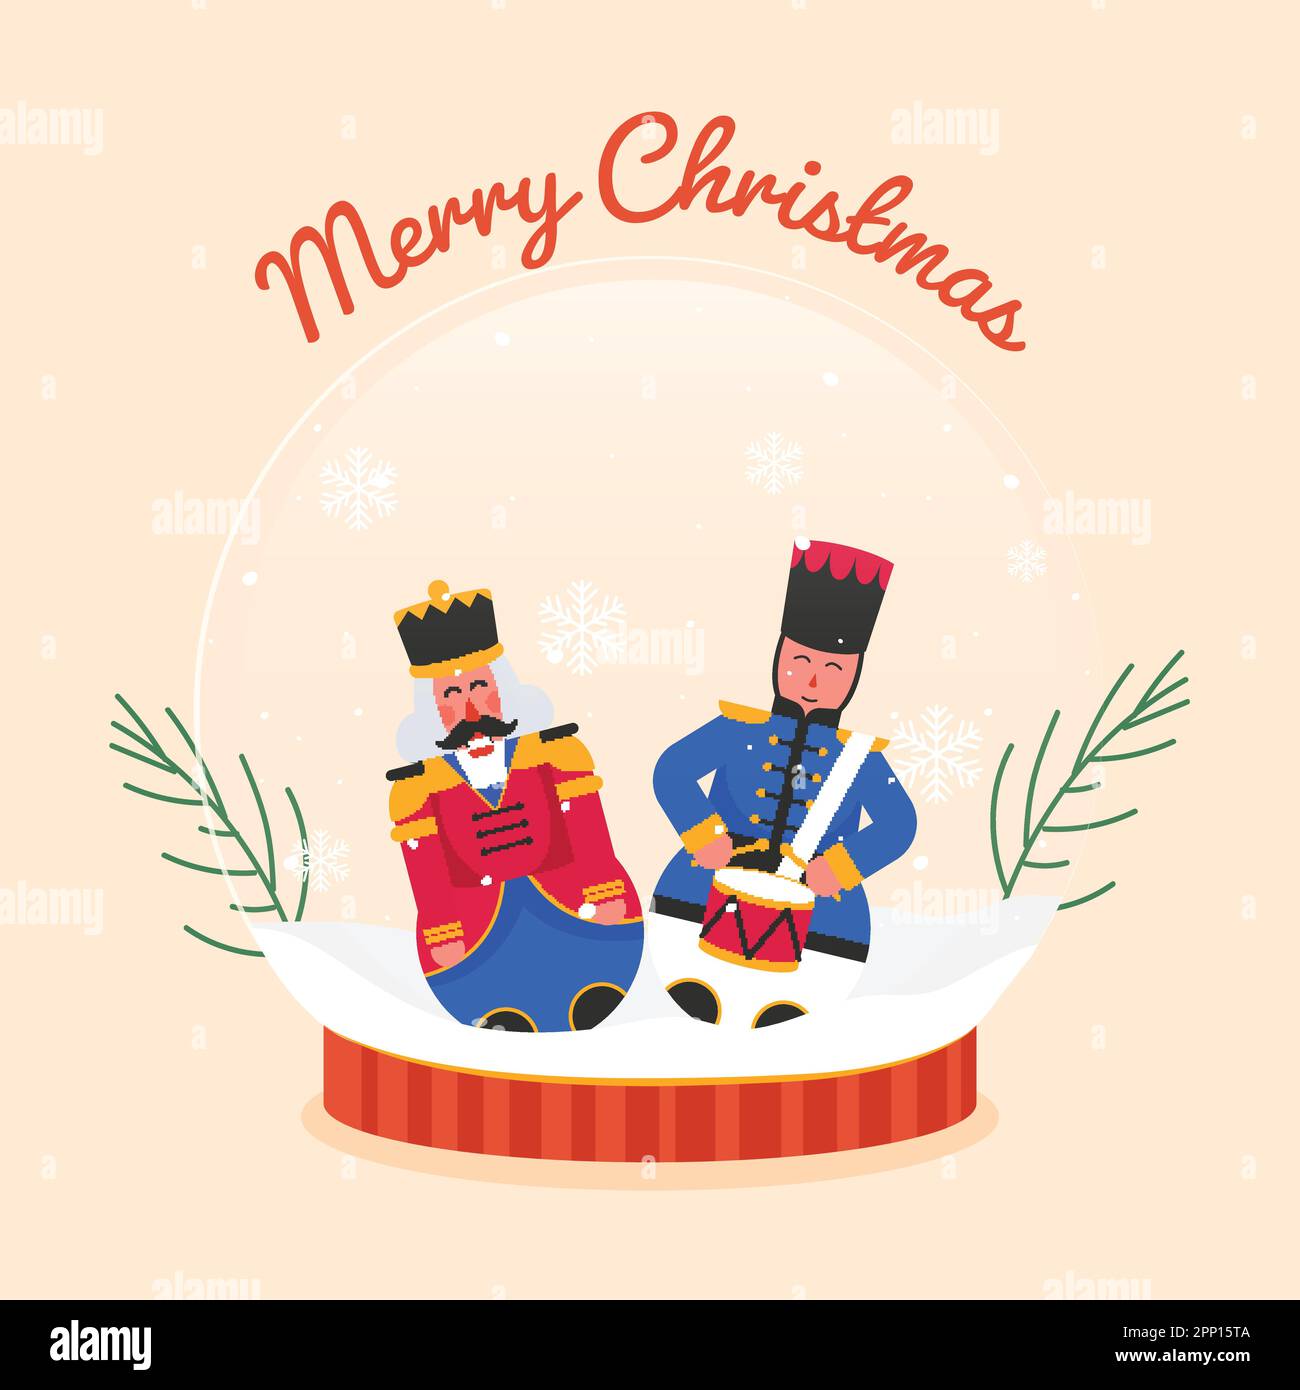 Merry Christmas Celebration Greeting Card With Nutcracker Characters Inside Snow Globe And Fir Leaves On Peach Background. Stock Vector